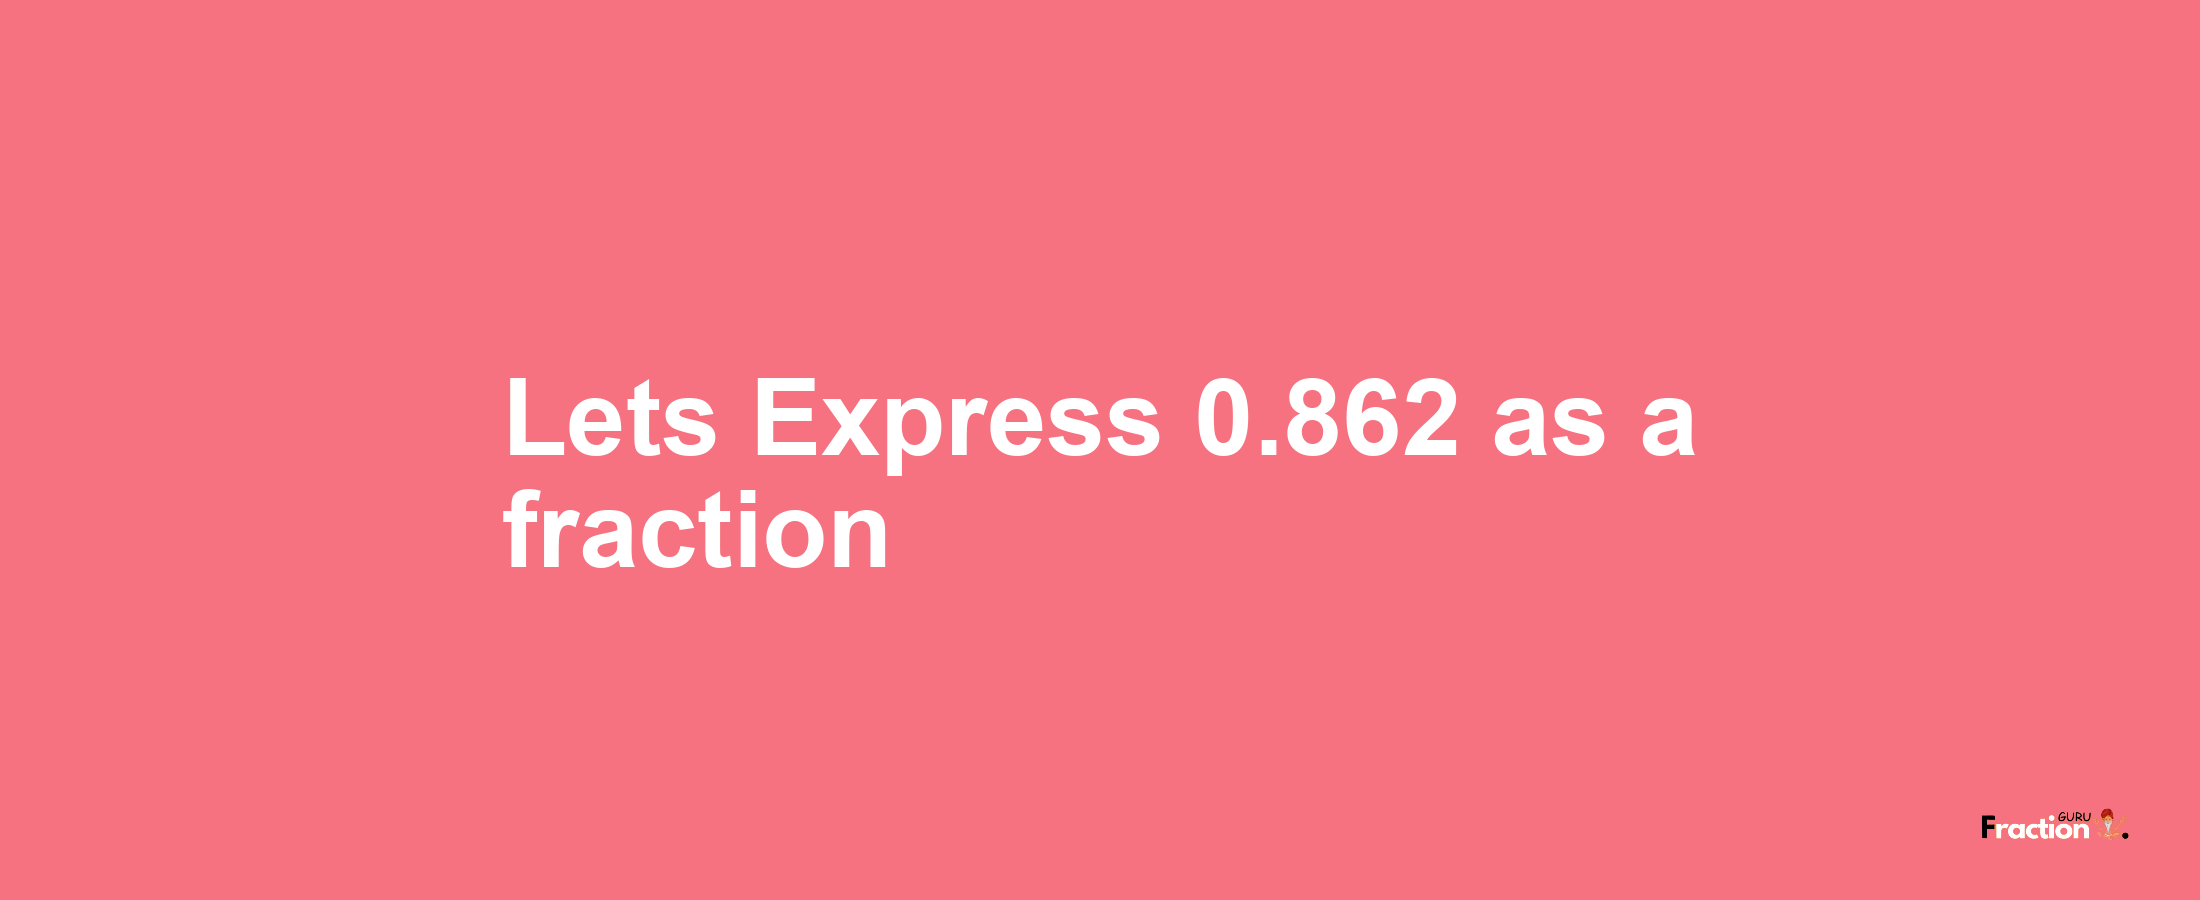 Lets Express 0.862 as afraction